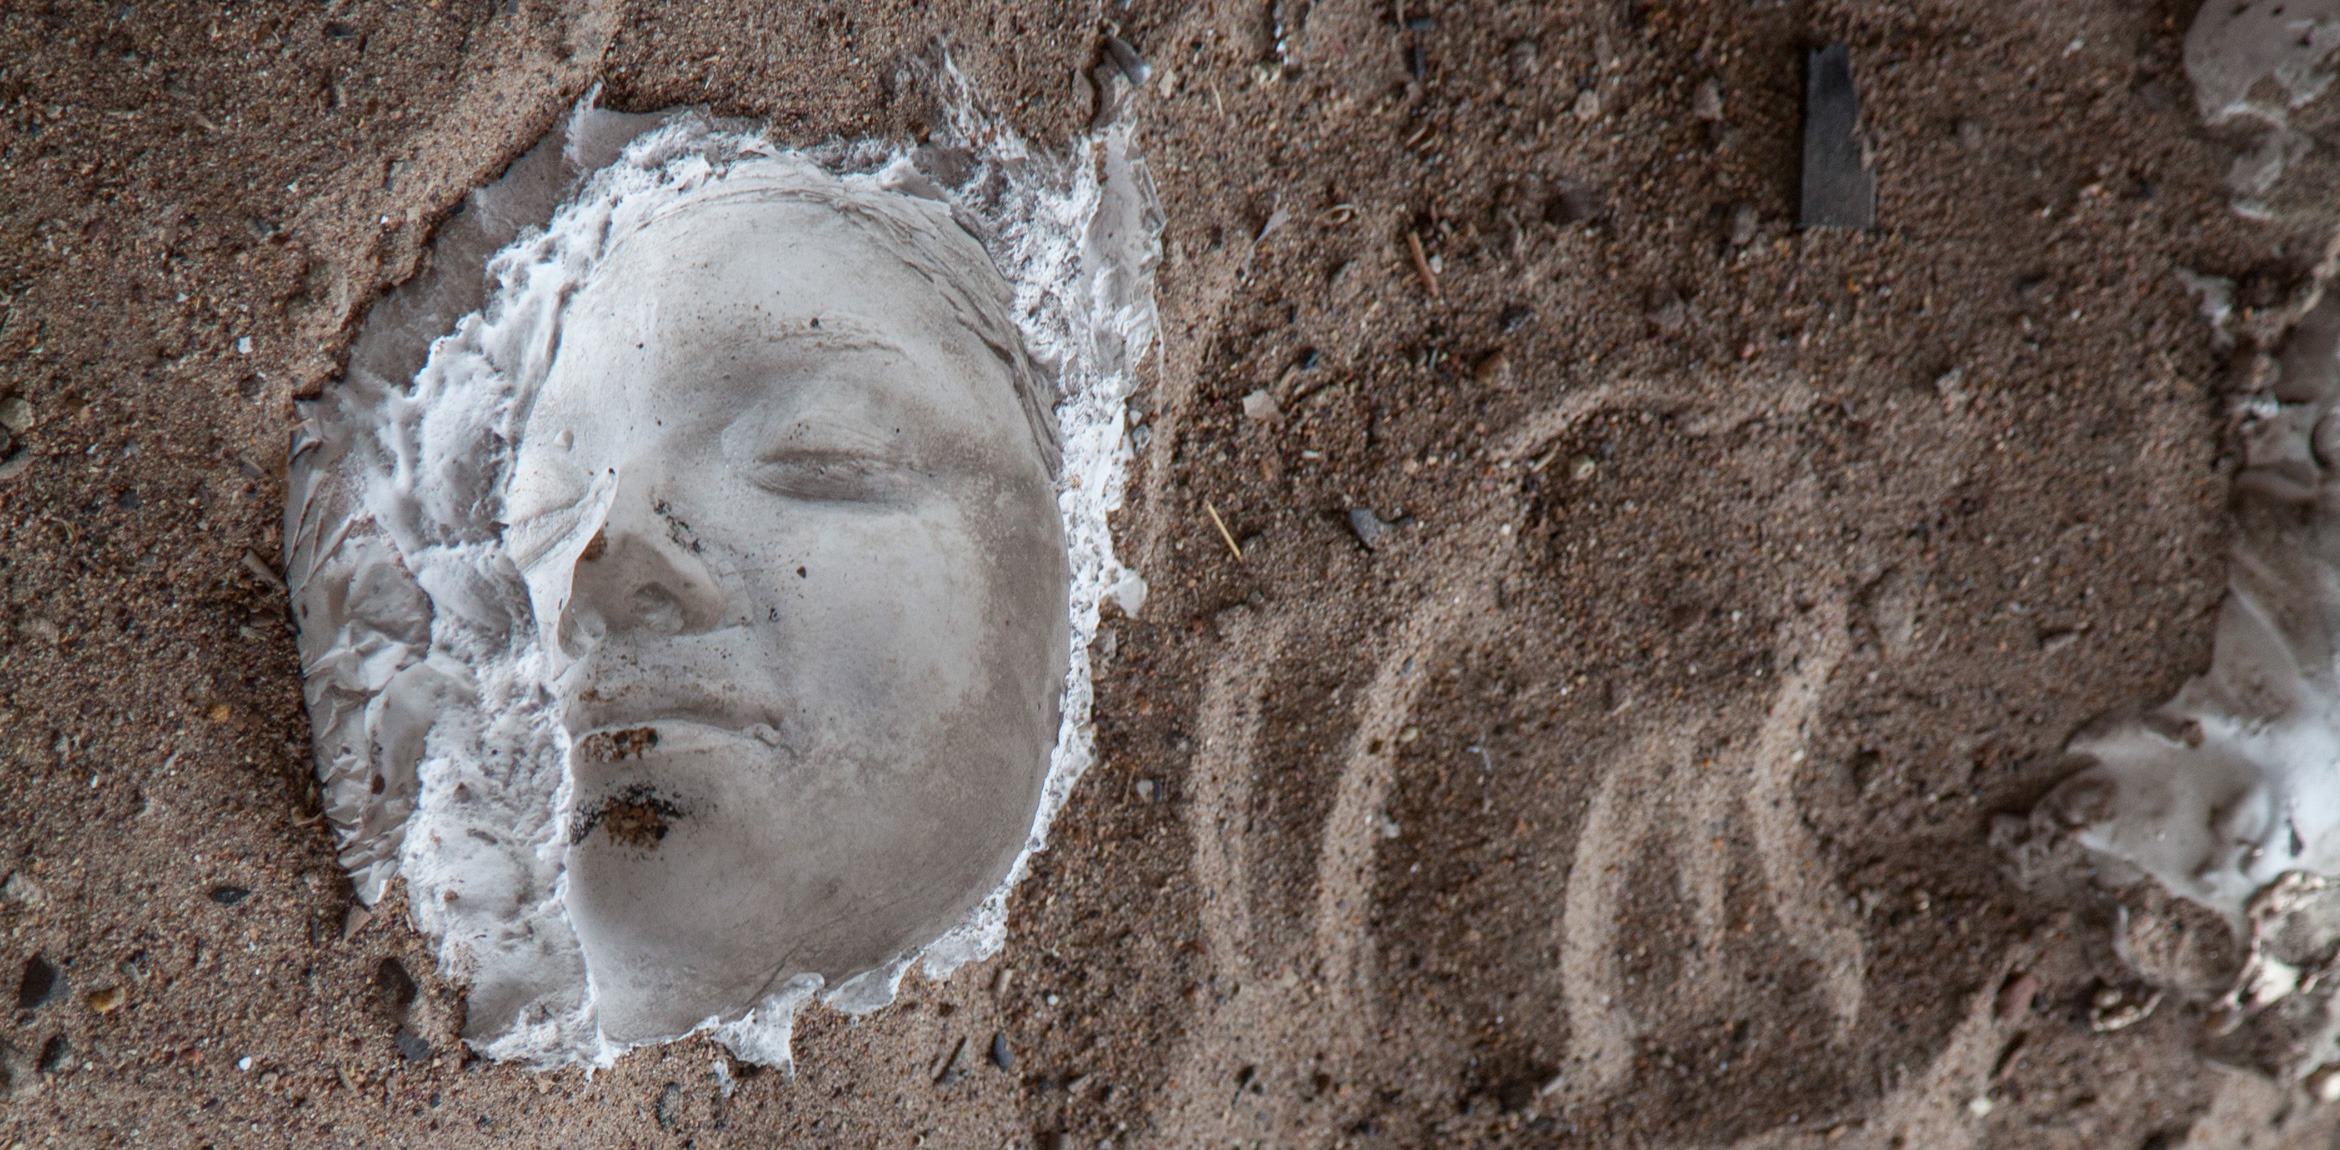 A closeup of a plaster sculpture of a face surrounded by dirt and sand.